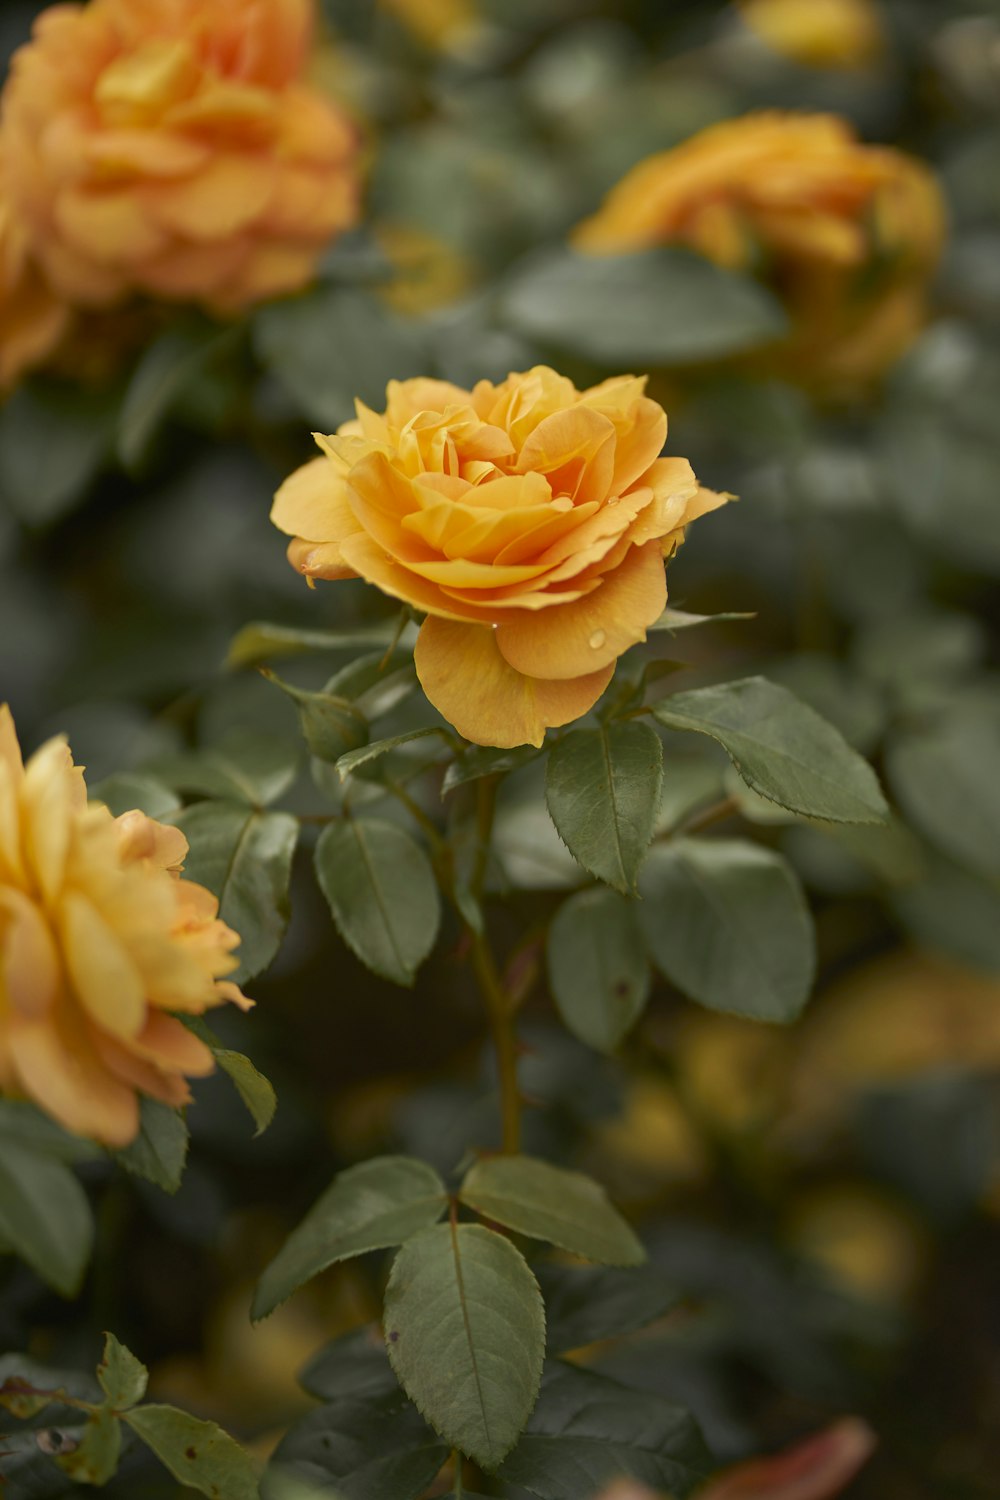 a close up of a yellow rose on a bush